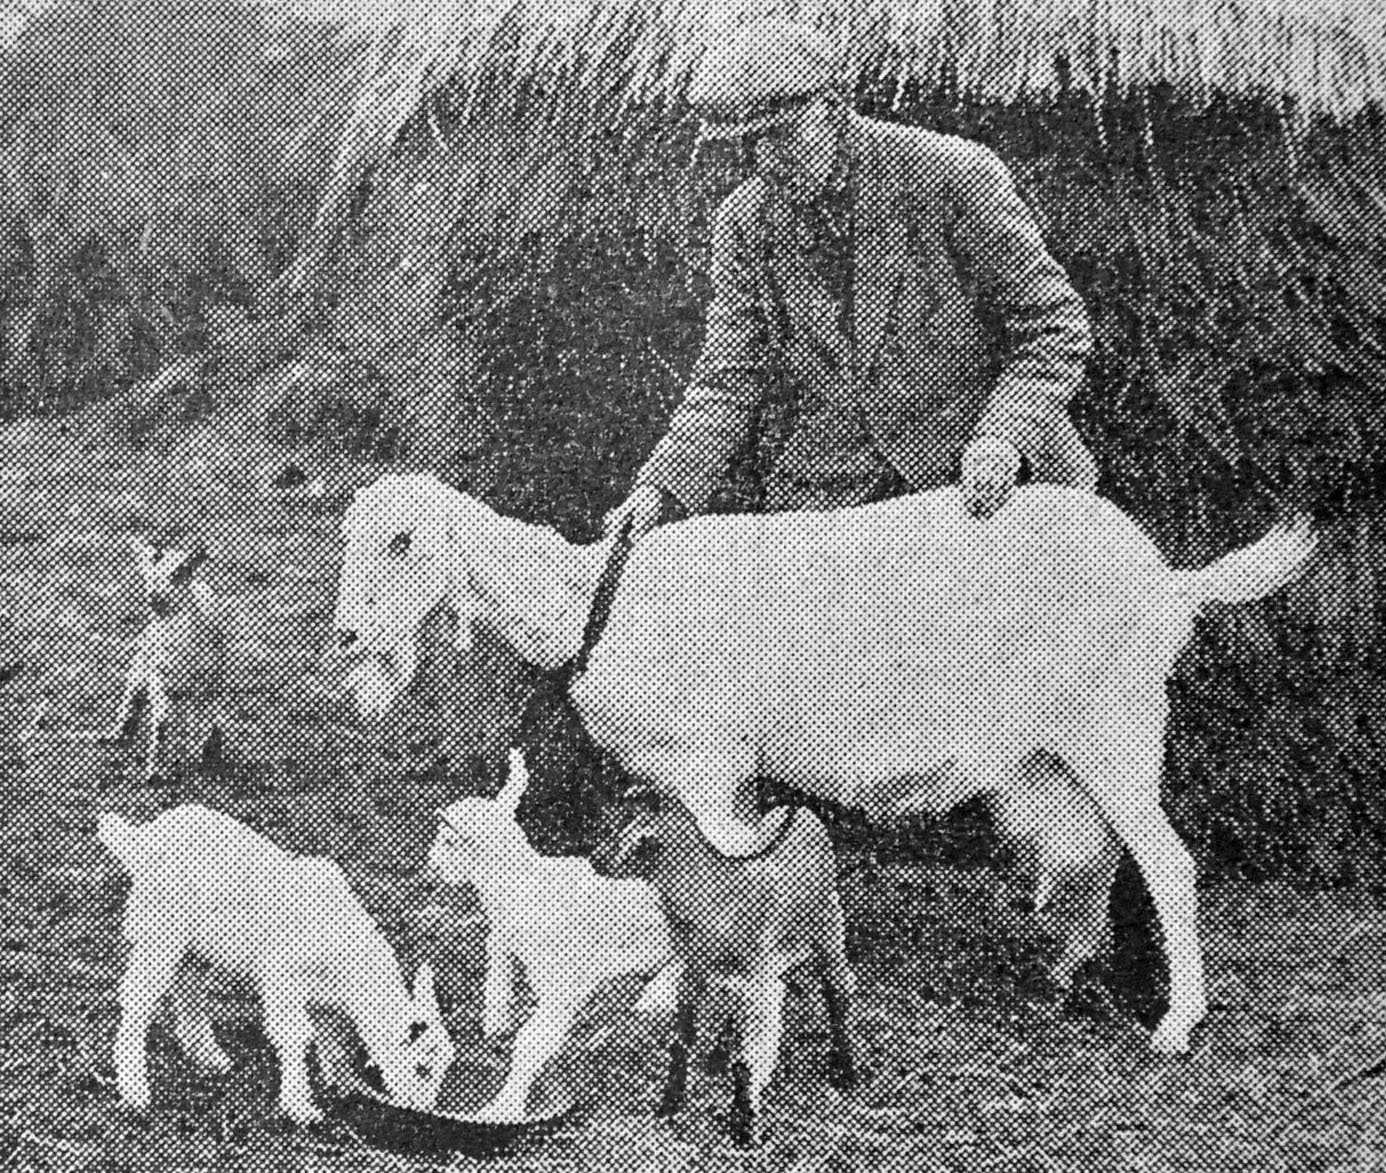 NO KIDDING: A goat having ‘quads’ made the headlines in 1946